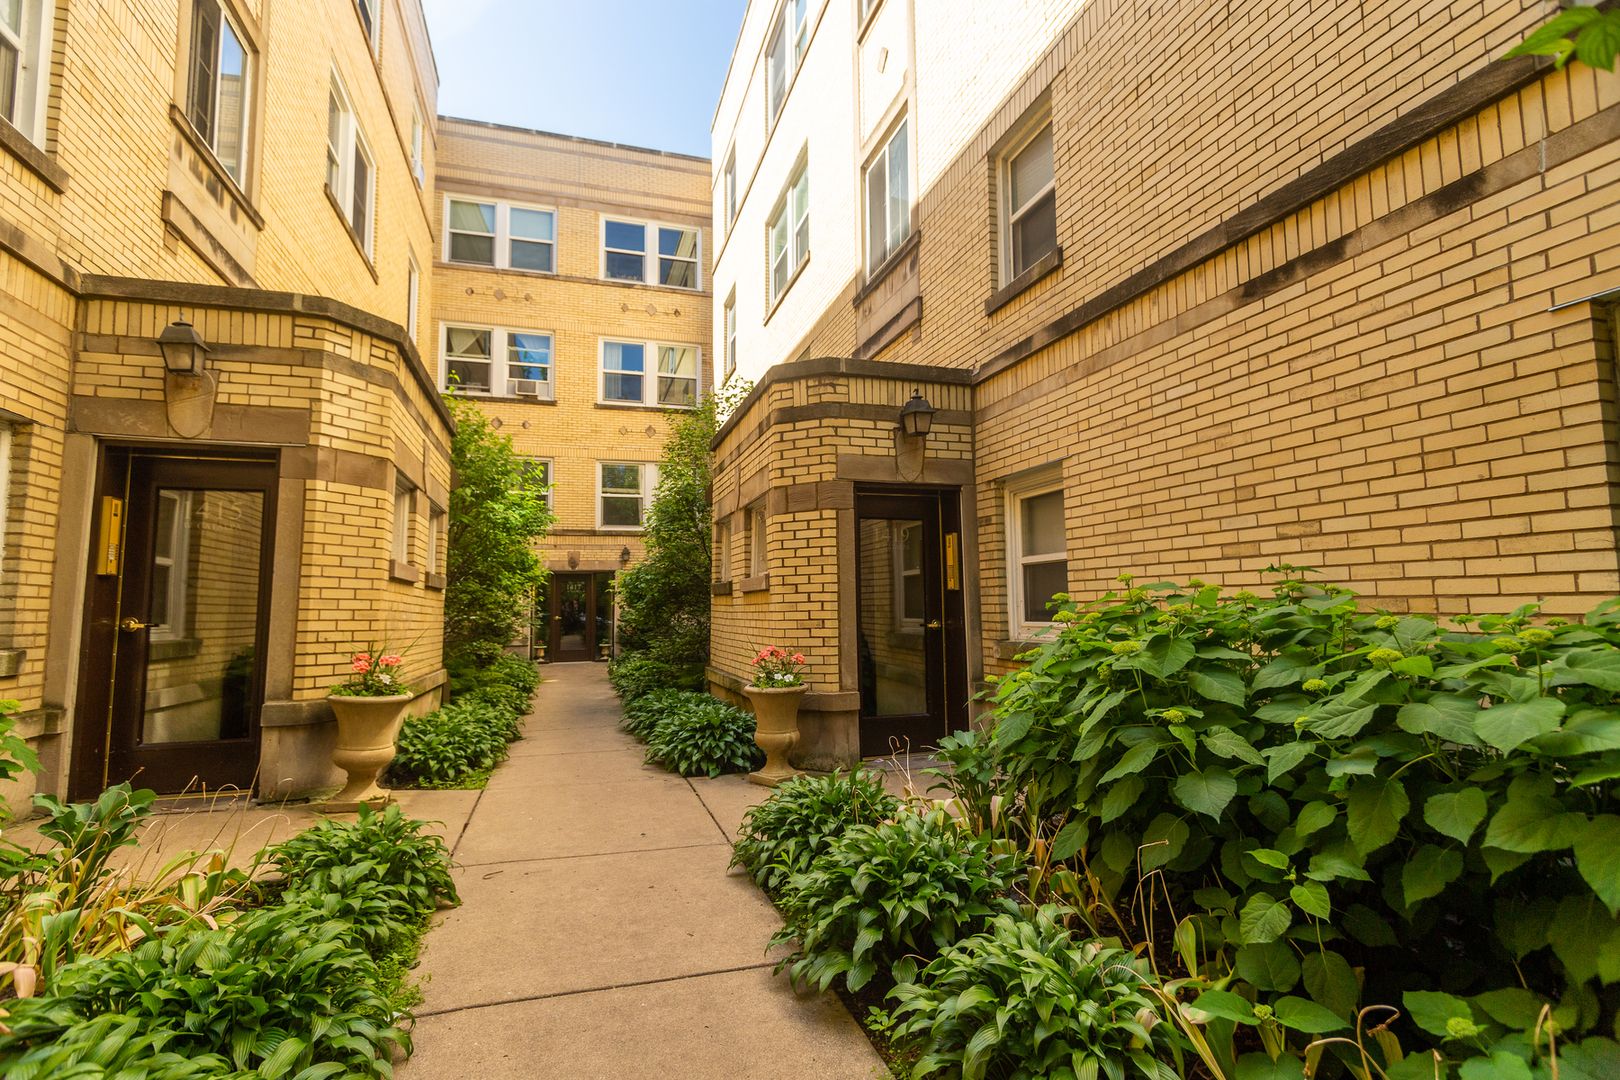 Main Photo: 1419 W Catalpa Avenue Unit 1S in Chicago: CHI - Edgewater Residential for sale ()  : MLS®# 11330319